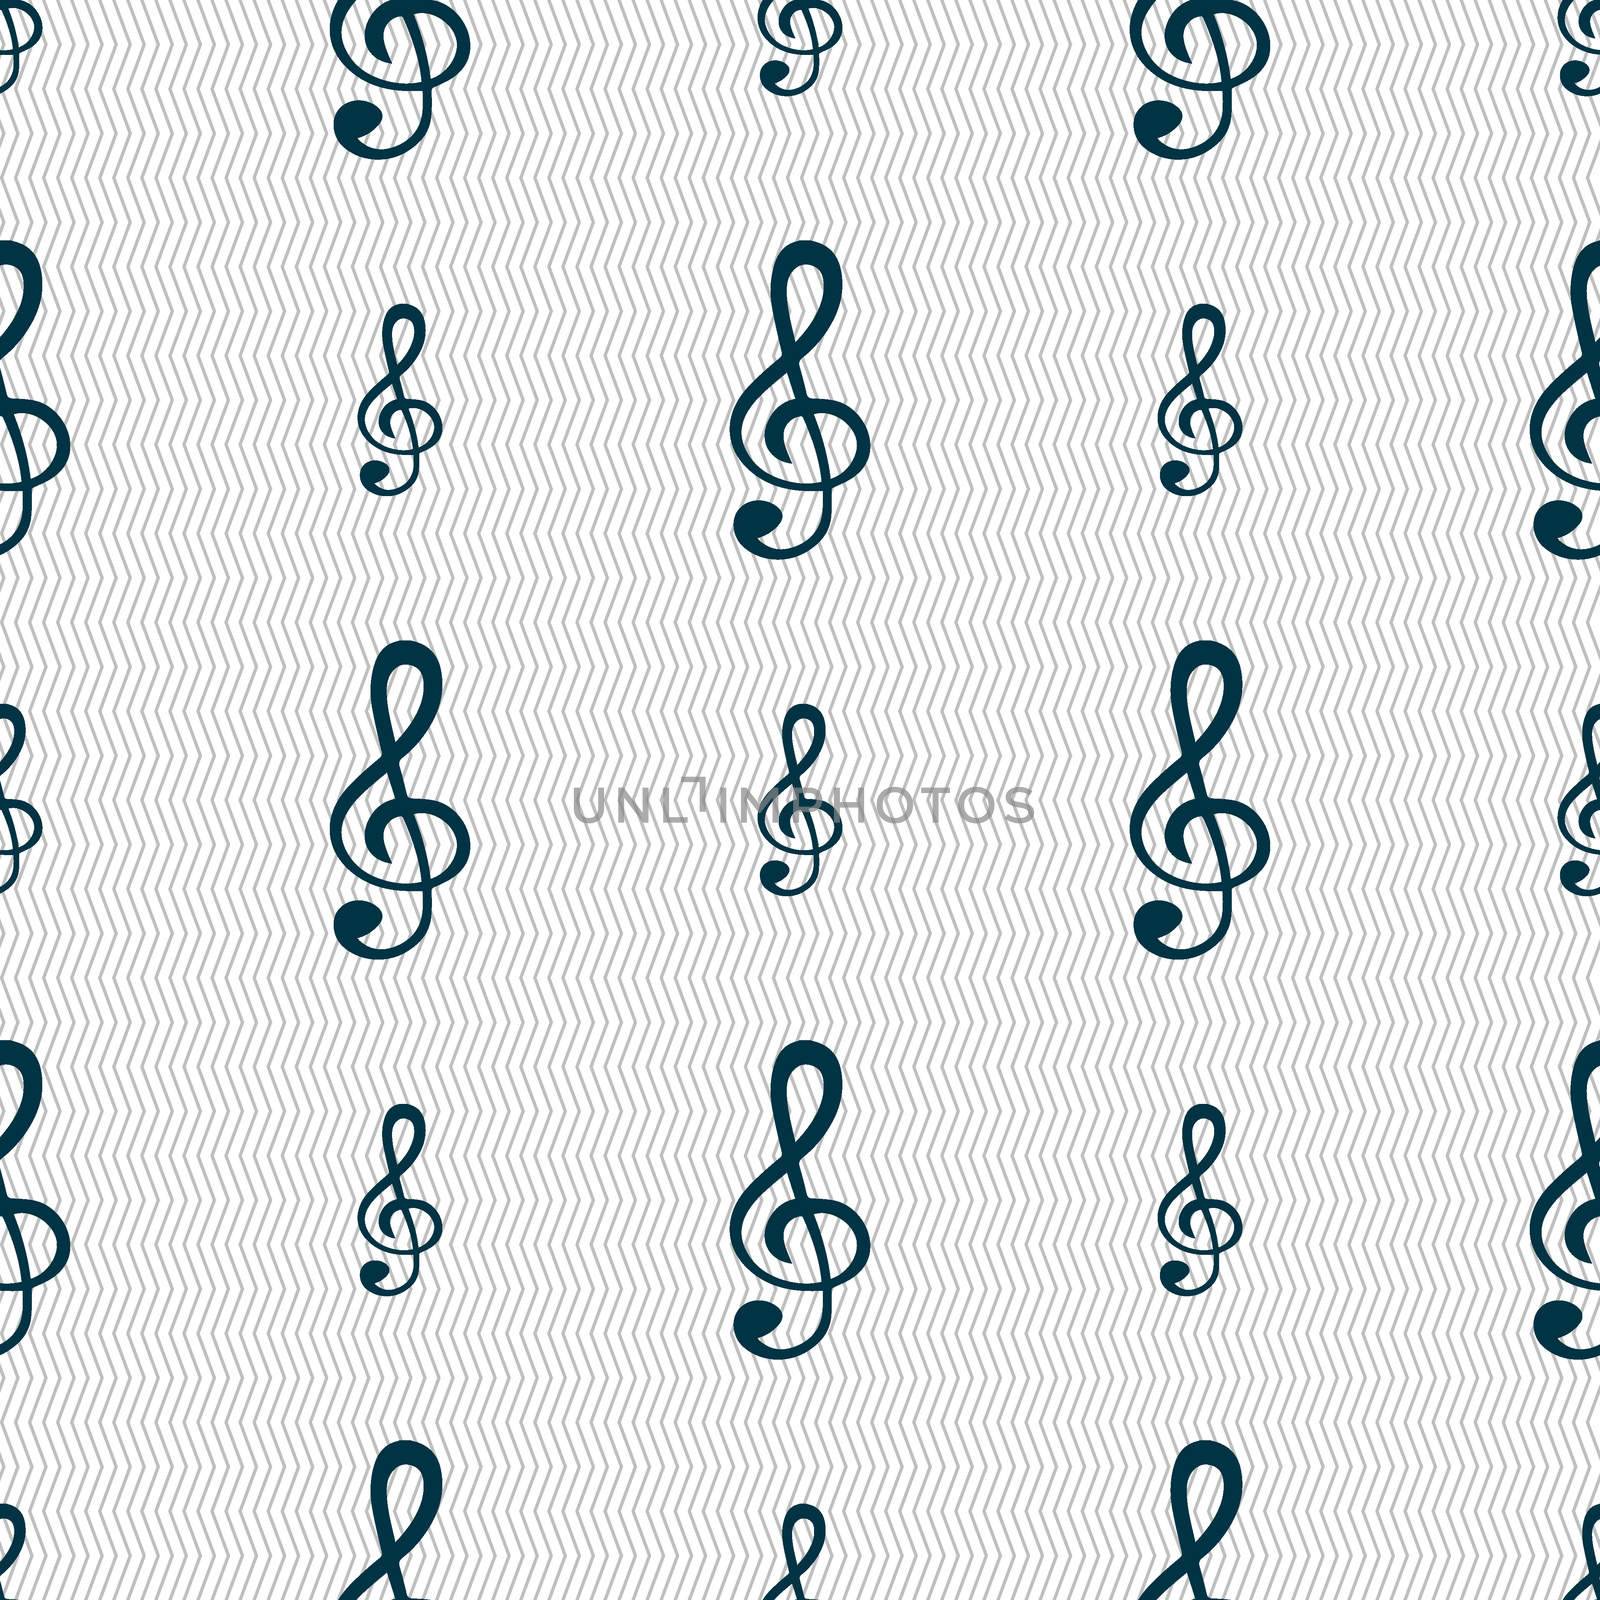 treble clef icon. Seamless abstract background with geometric shapes.  by serhii_lohvyniuk